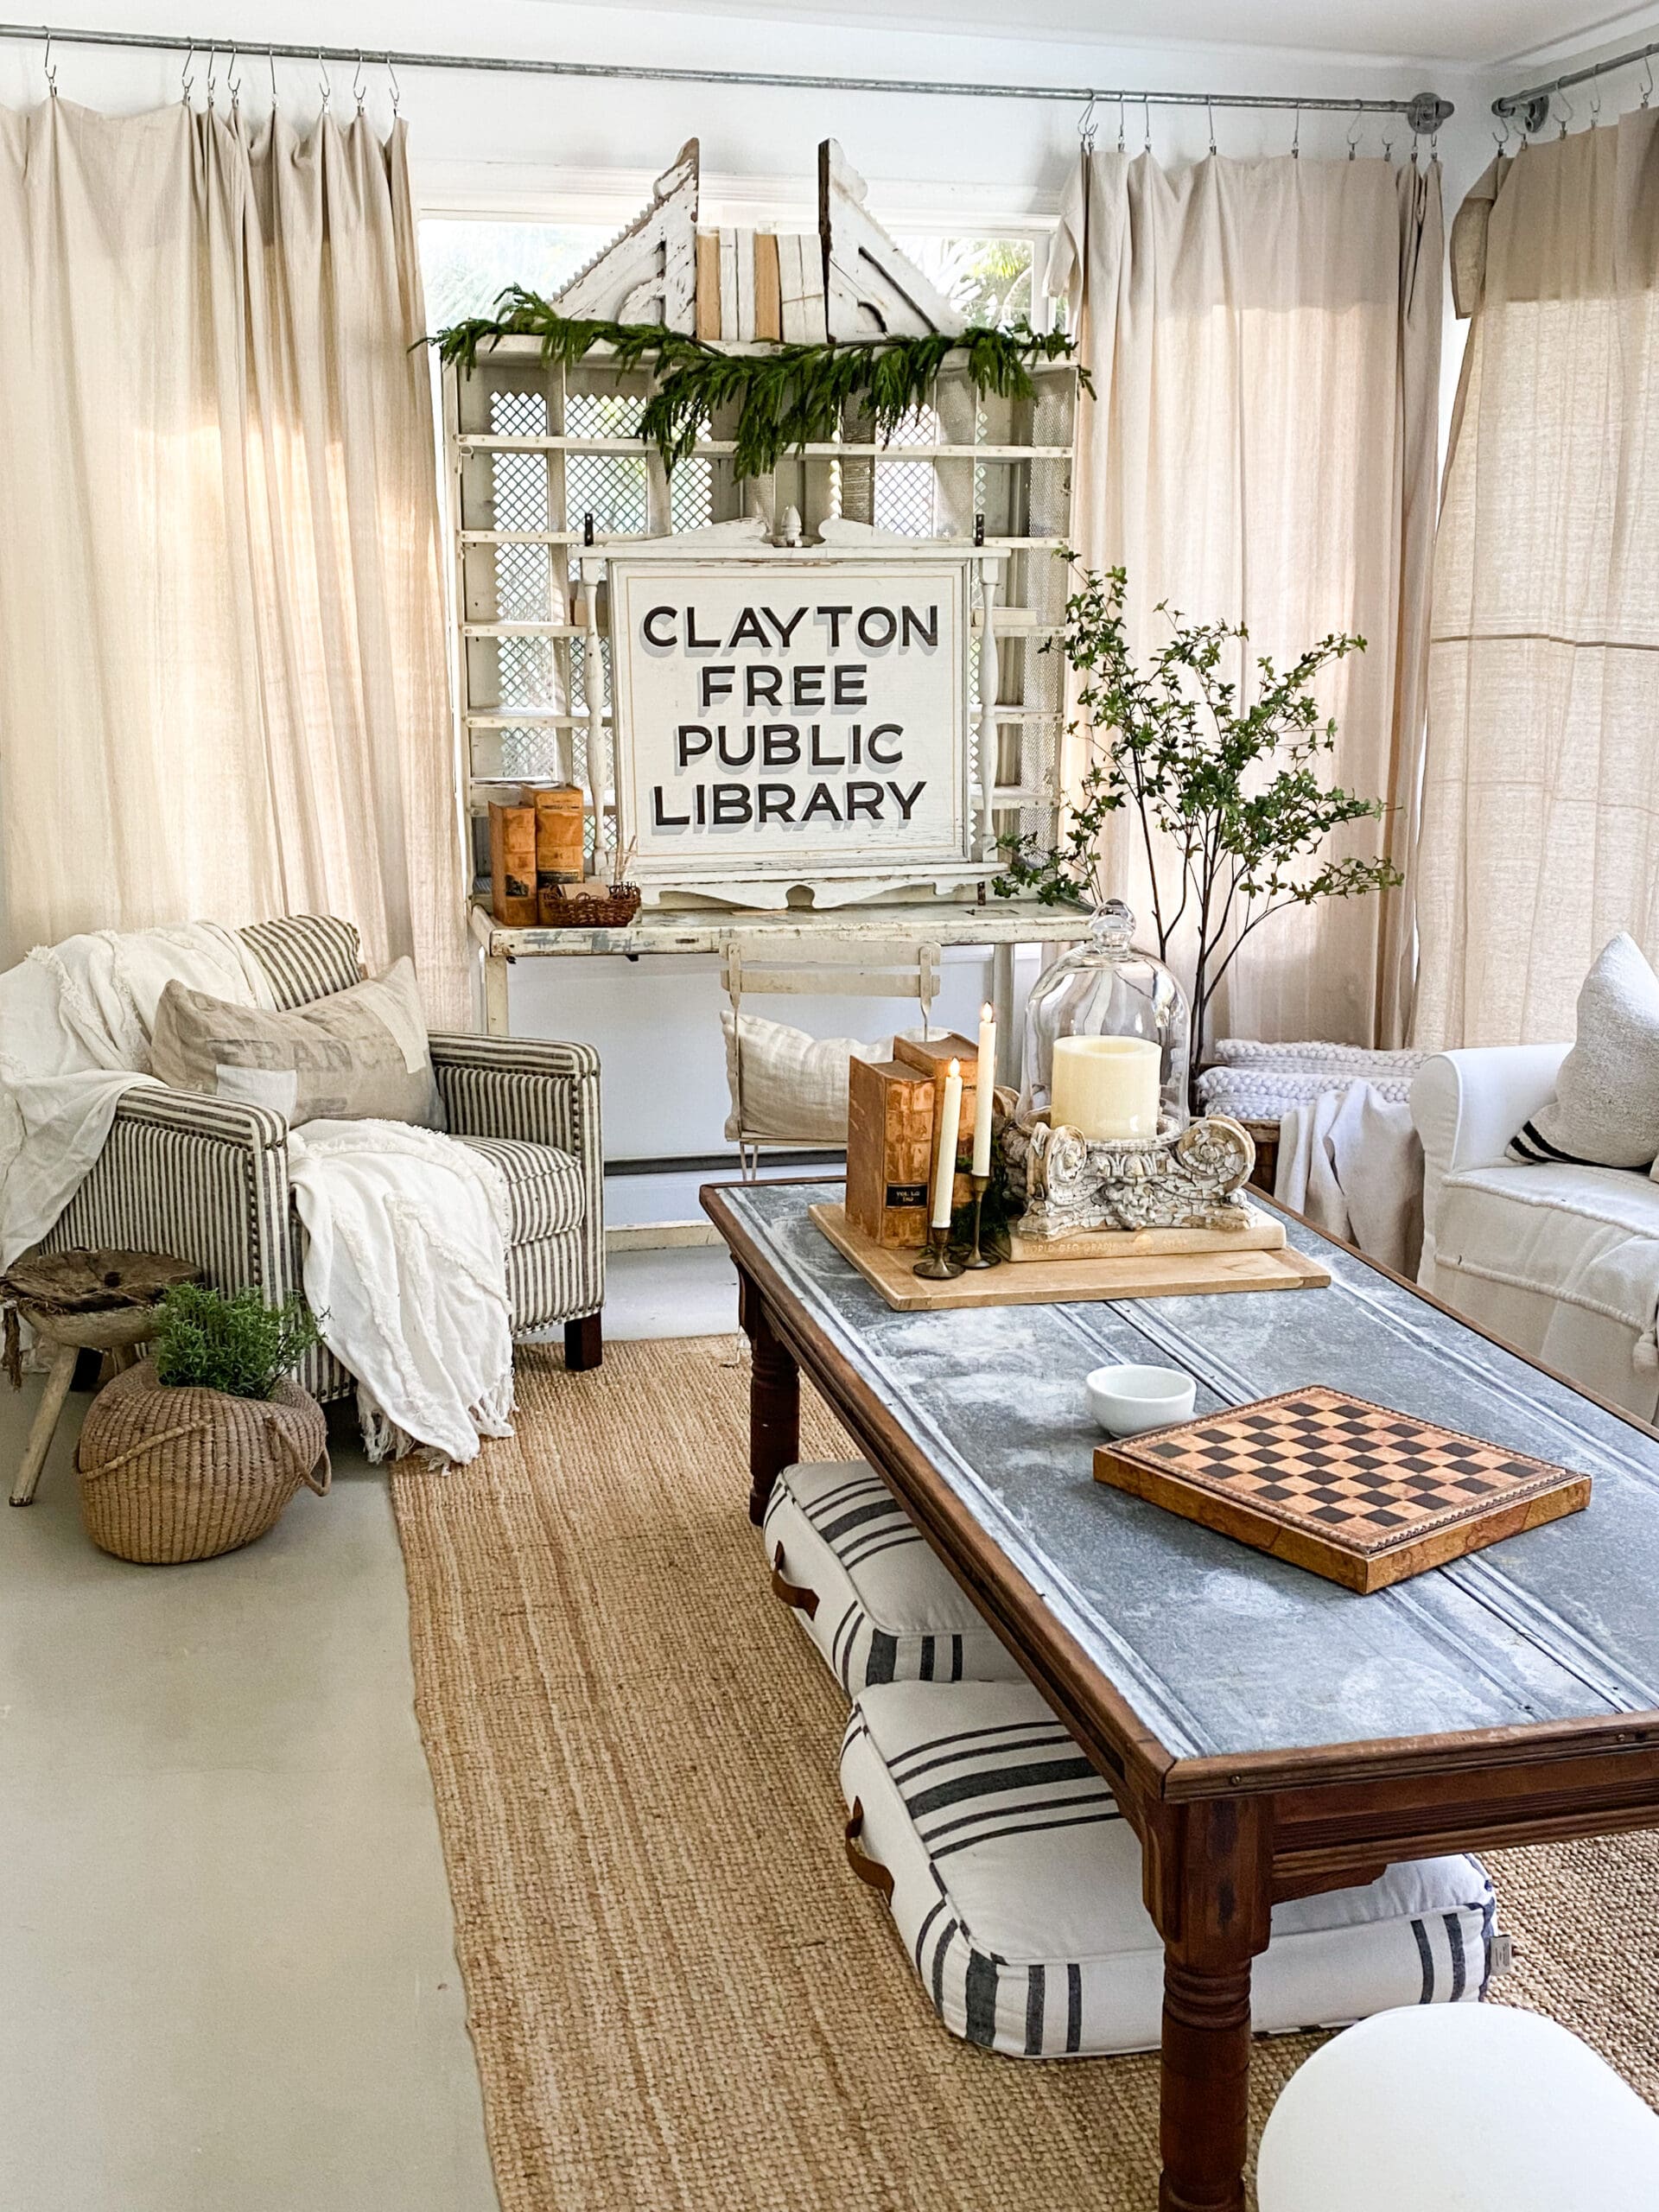 Get Inspired With These Living Room Decor Ideas